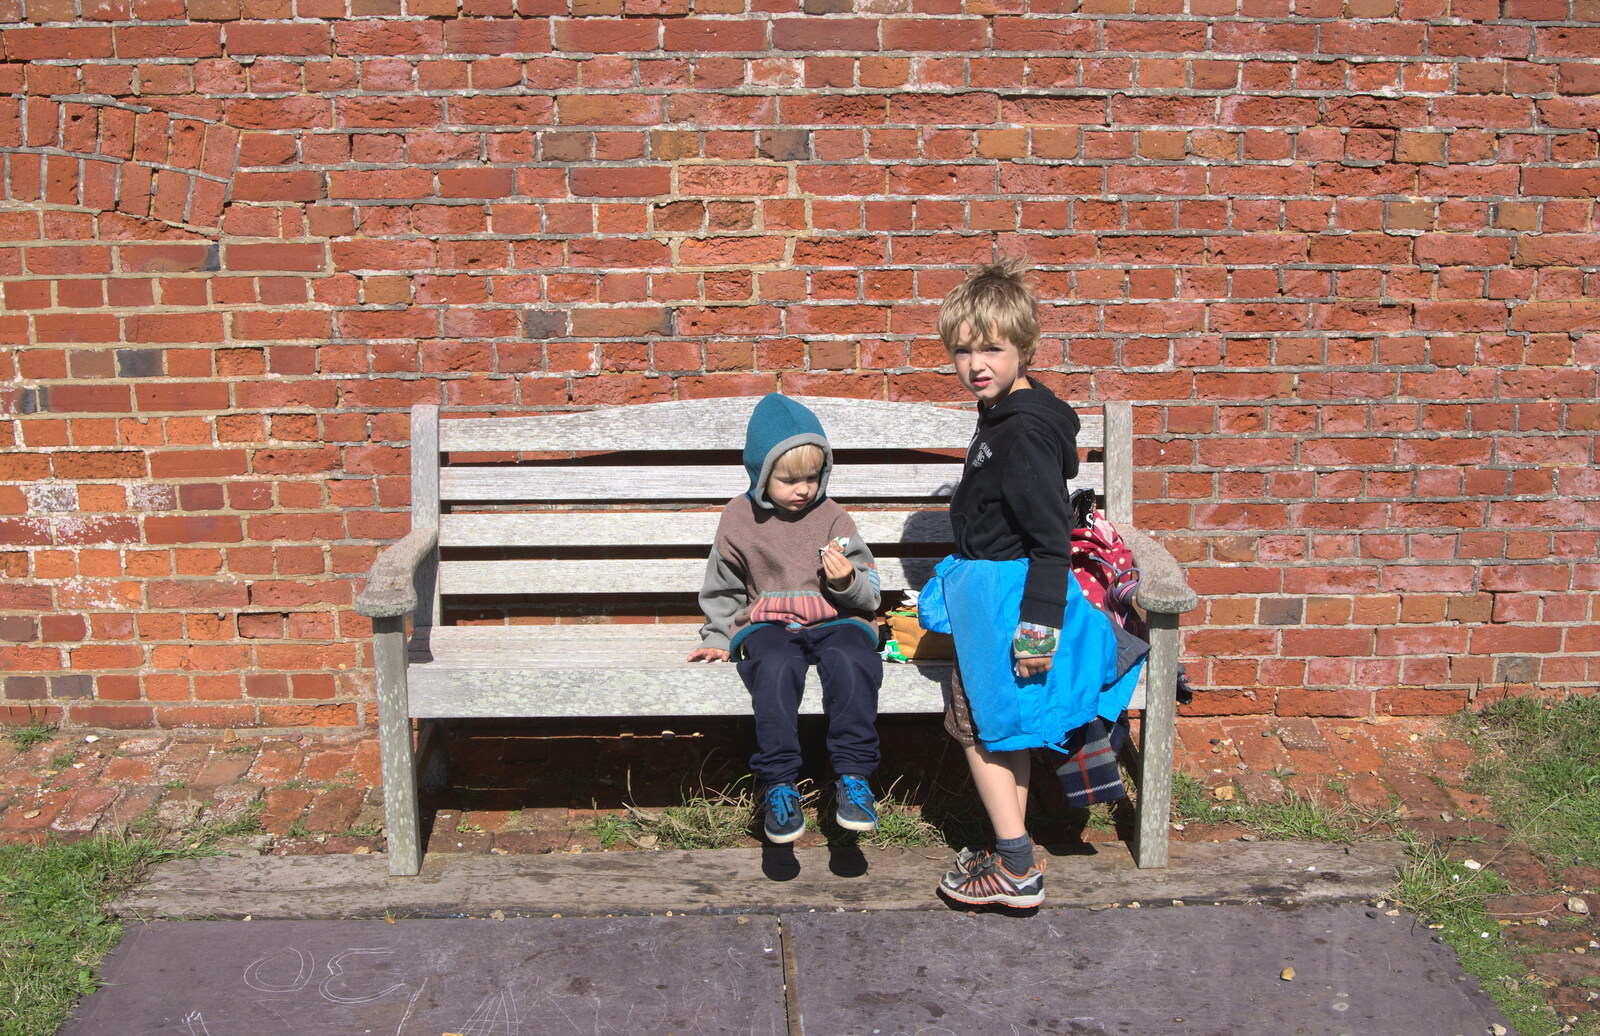 Harry and Fred on a bench from A Trip to Hurst Castle, Keyhaven, Hampshire - 28th August 2015